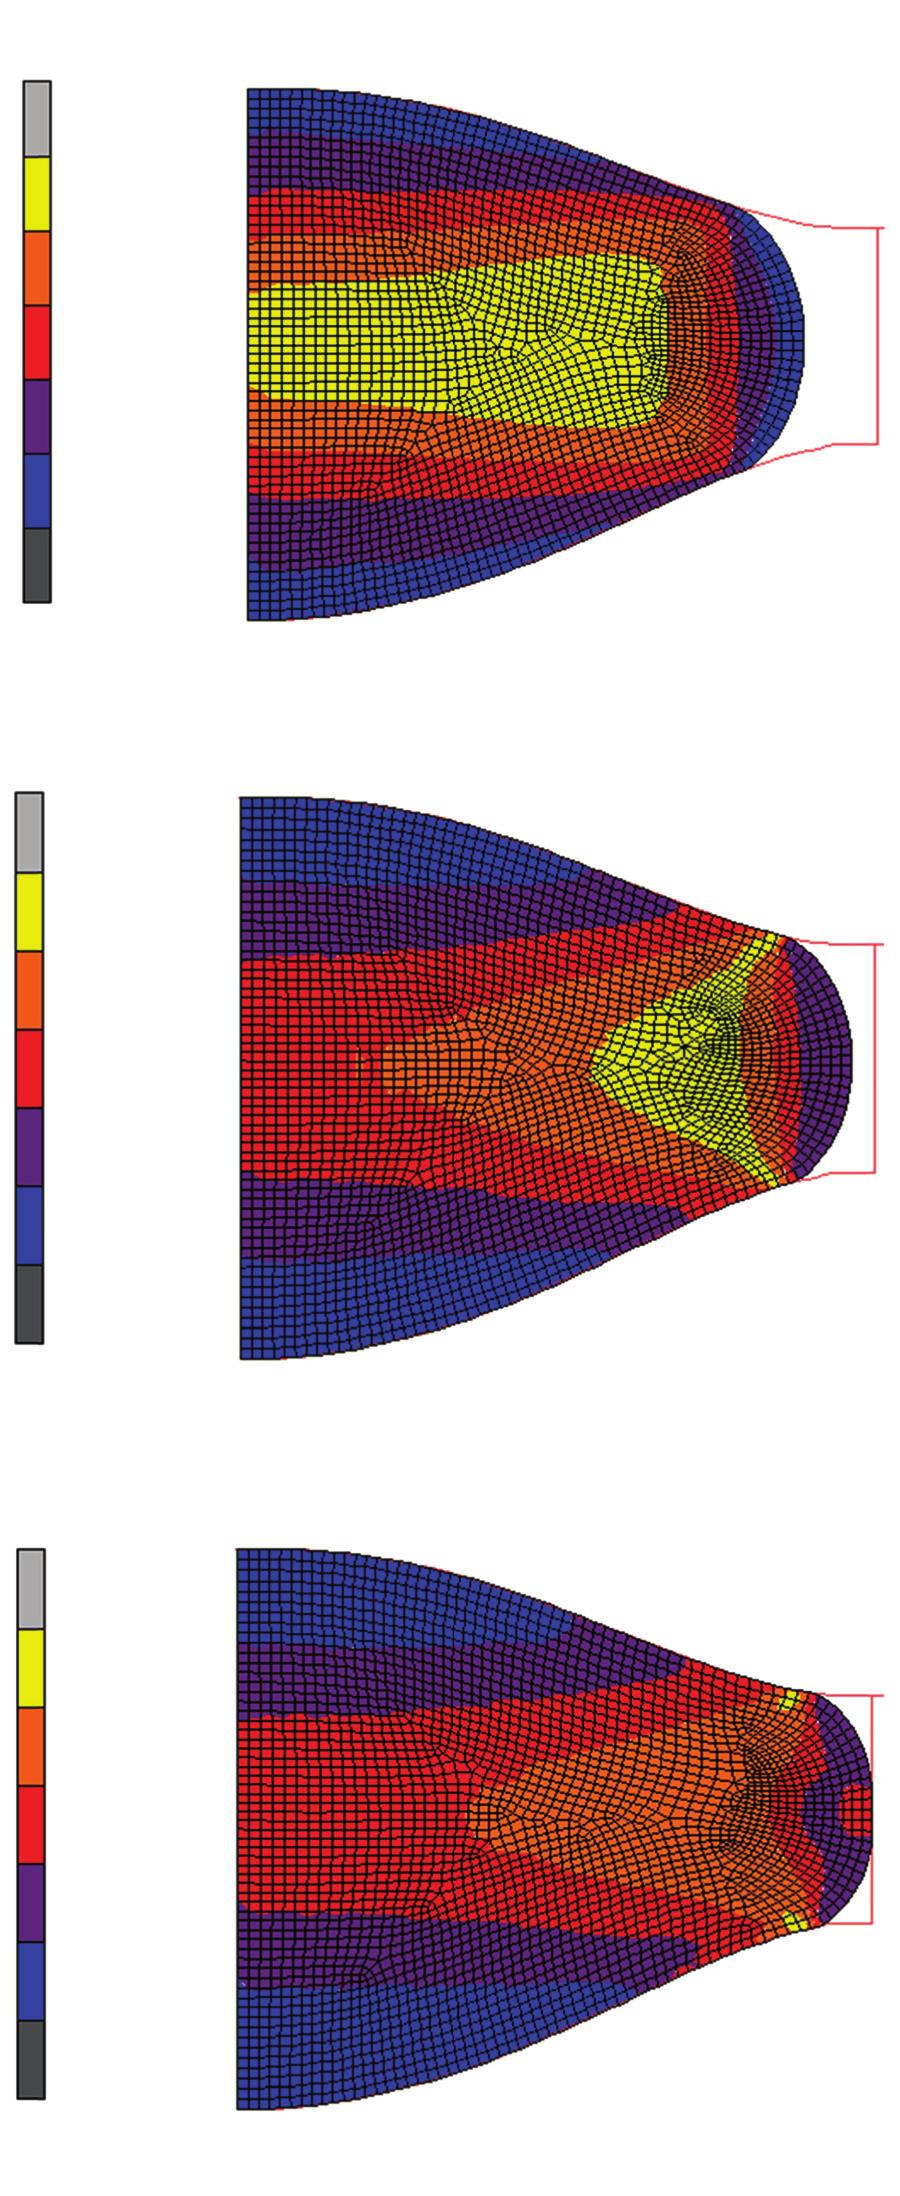 It can be found from the figure that the predicted data obtained from the FEM show a good agreement with the measured results, which shows FEM can be used for modeling viscoelastic material behavior